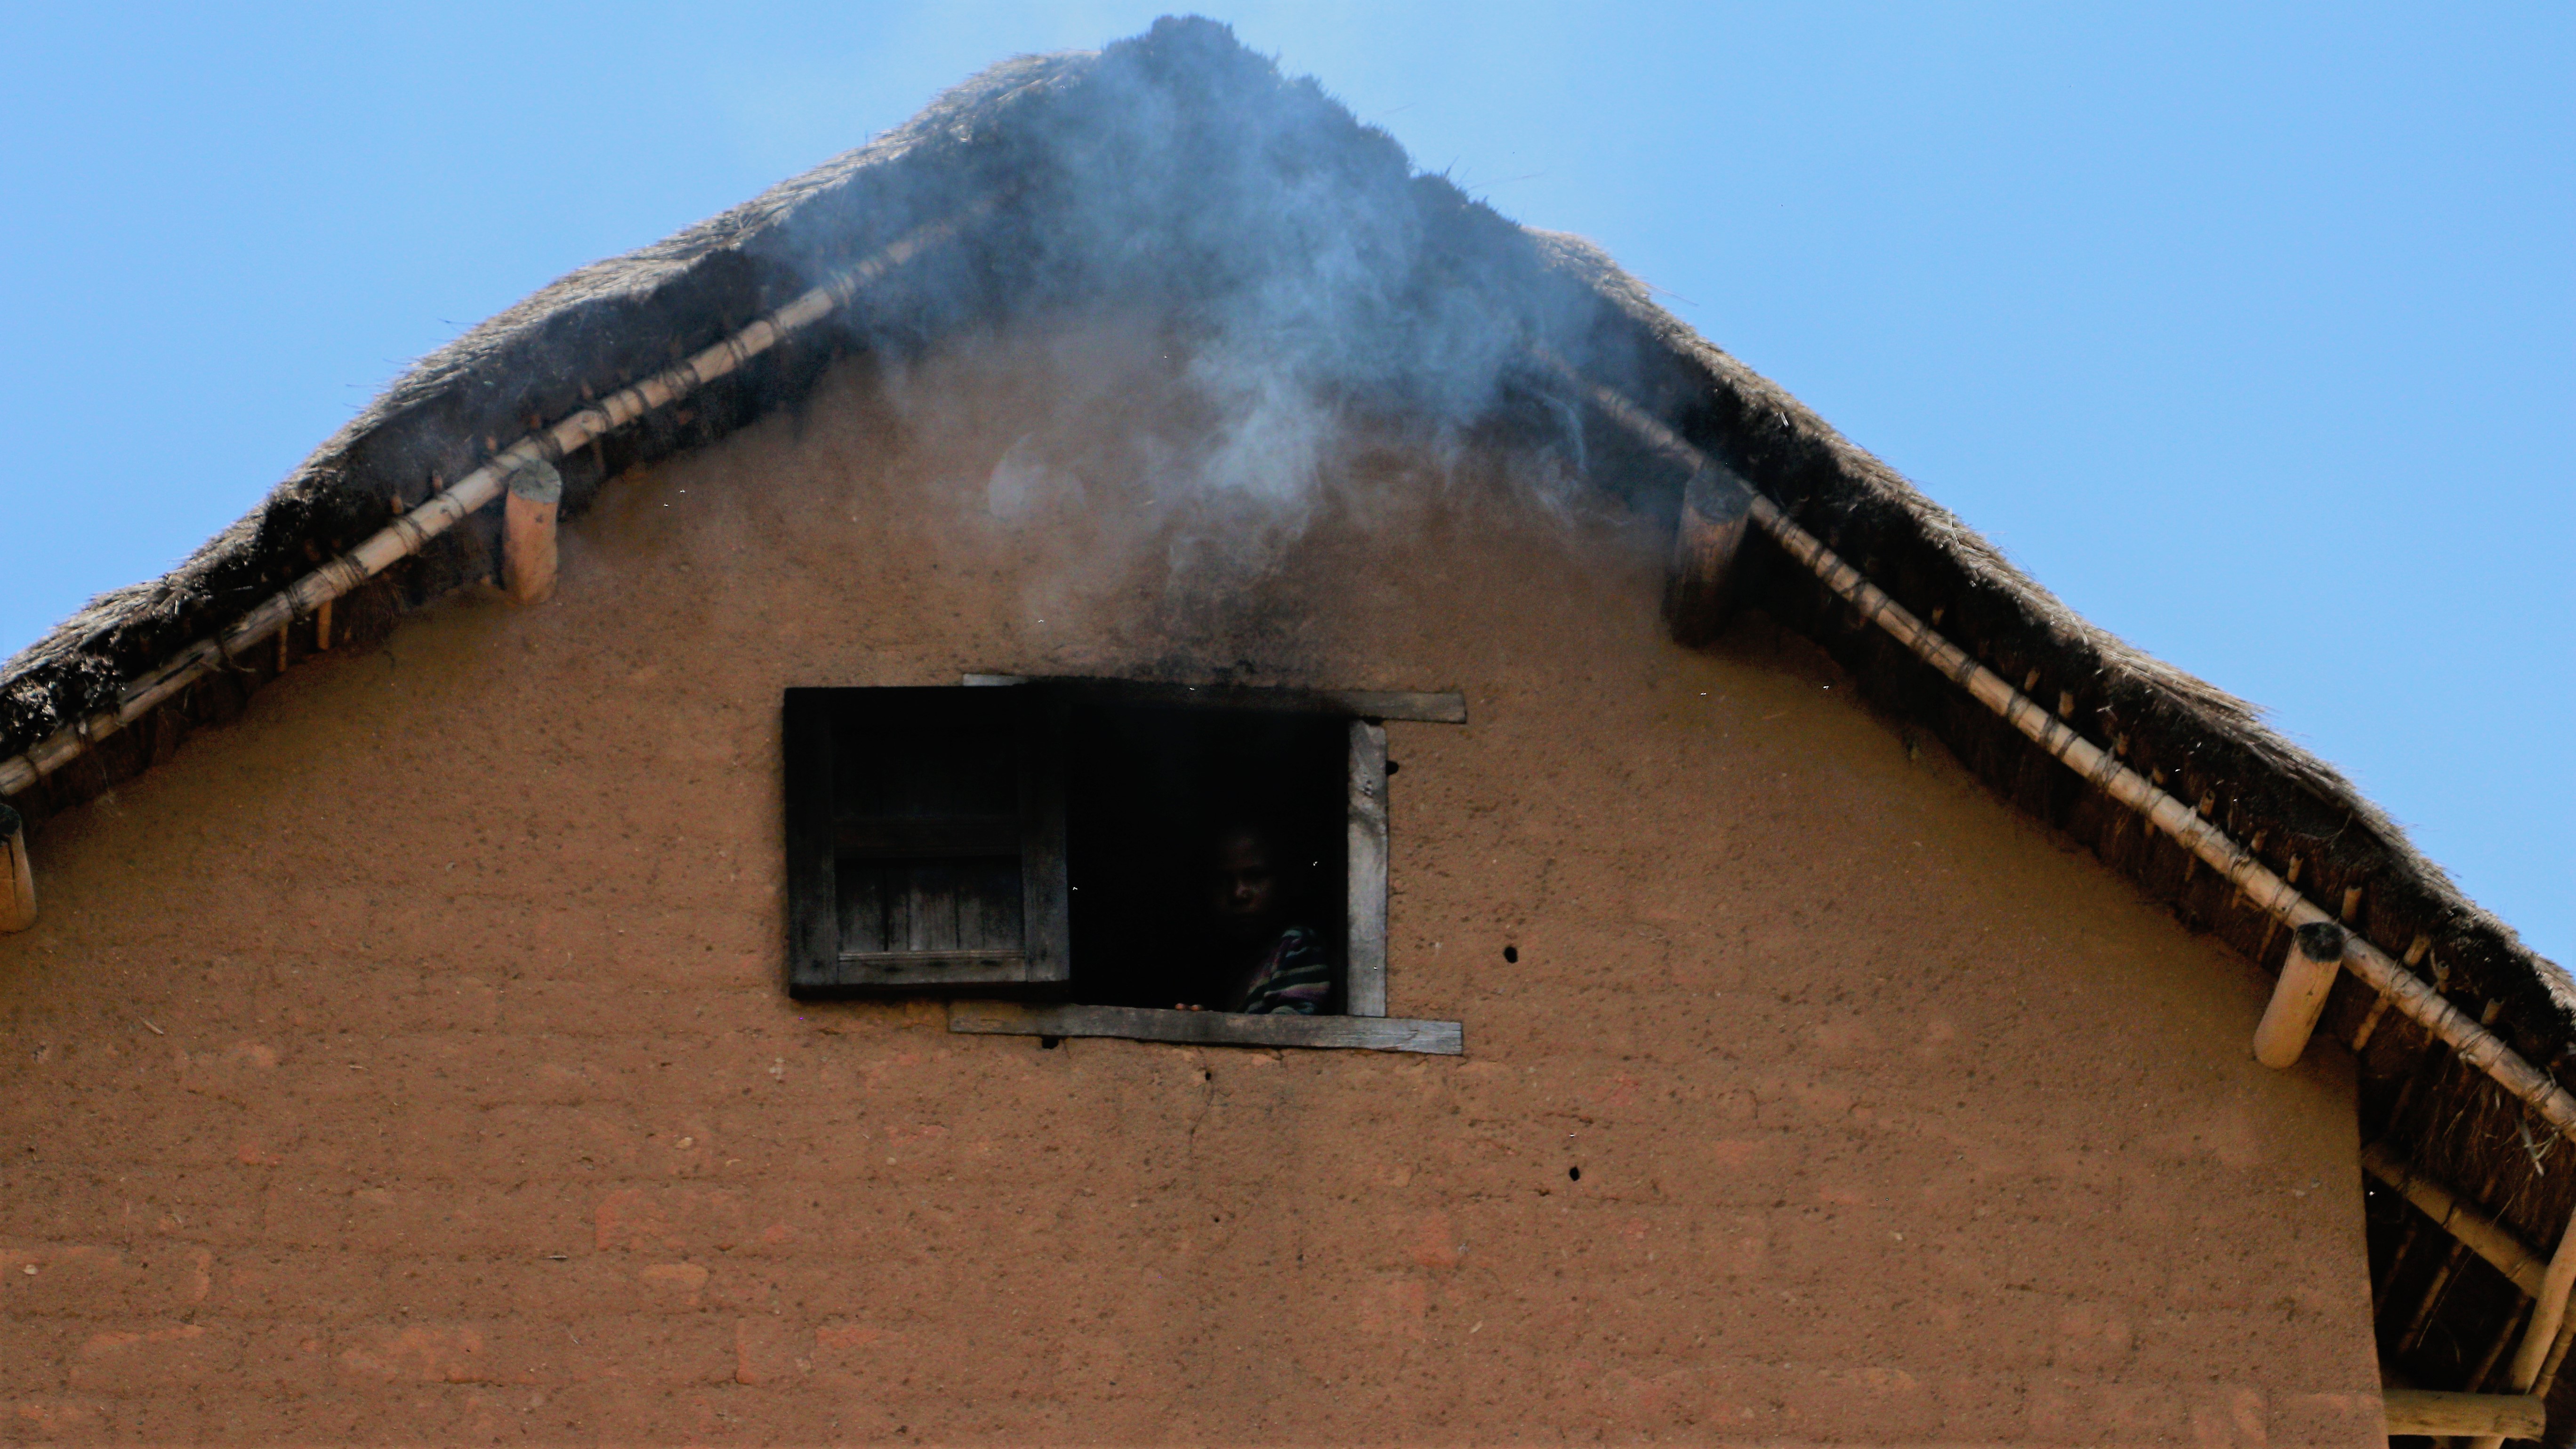 Smoke generated from firewood, from the inside of a house in Fianarantsoa. A photo that best demonstrates the real indoor household pollution issue in Madagascar. The kid looking out of the window seems to be so used to this smoke.